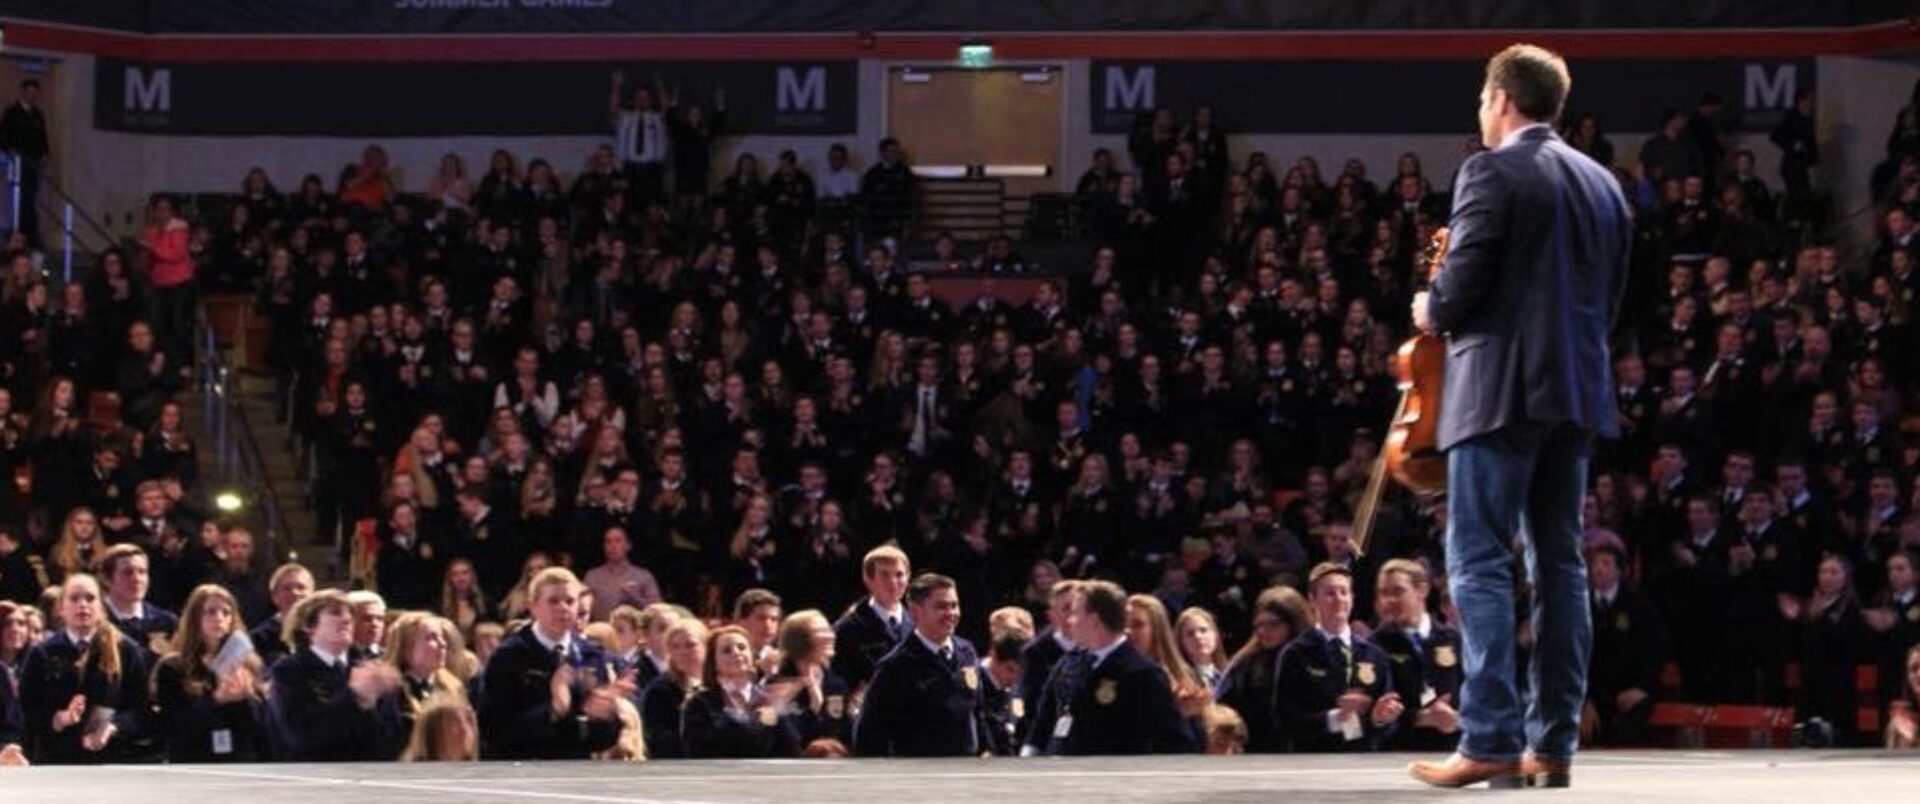 A crowd of people sitting in front of a large audience.